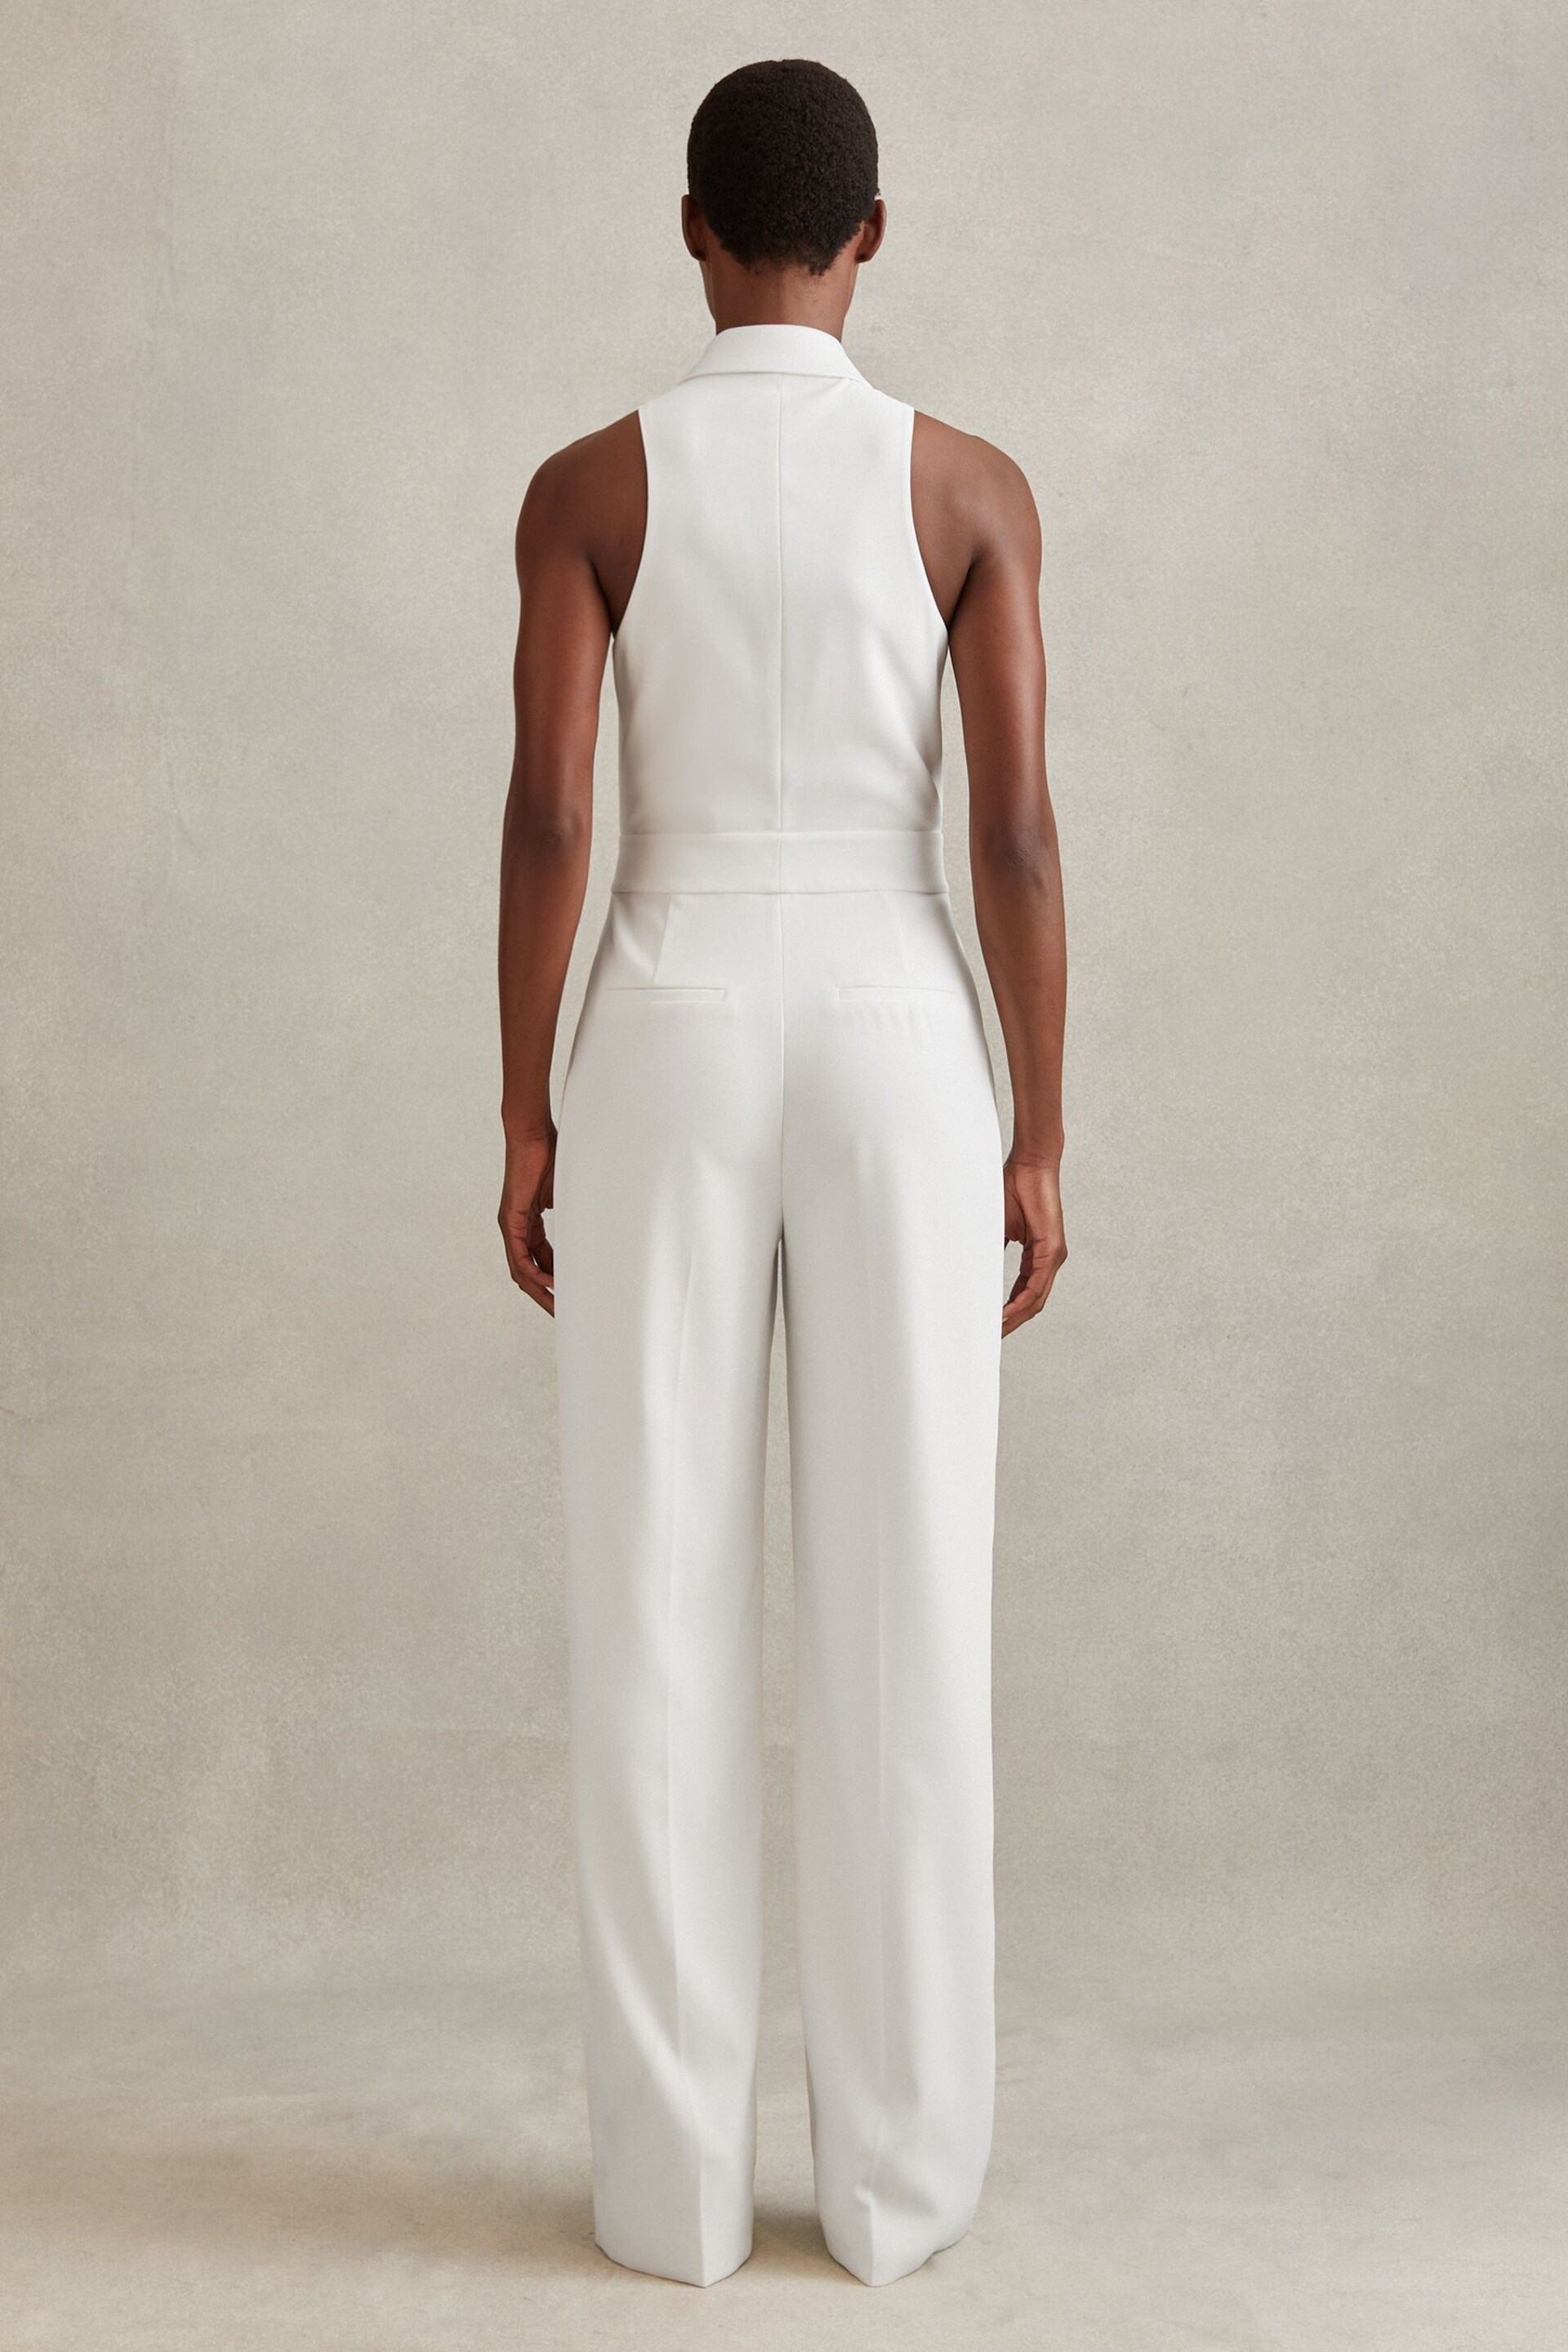 Reiss White Lainey Double Breasted Satin Tux Jumpsuit - Image 5 of 6